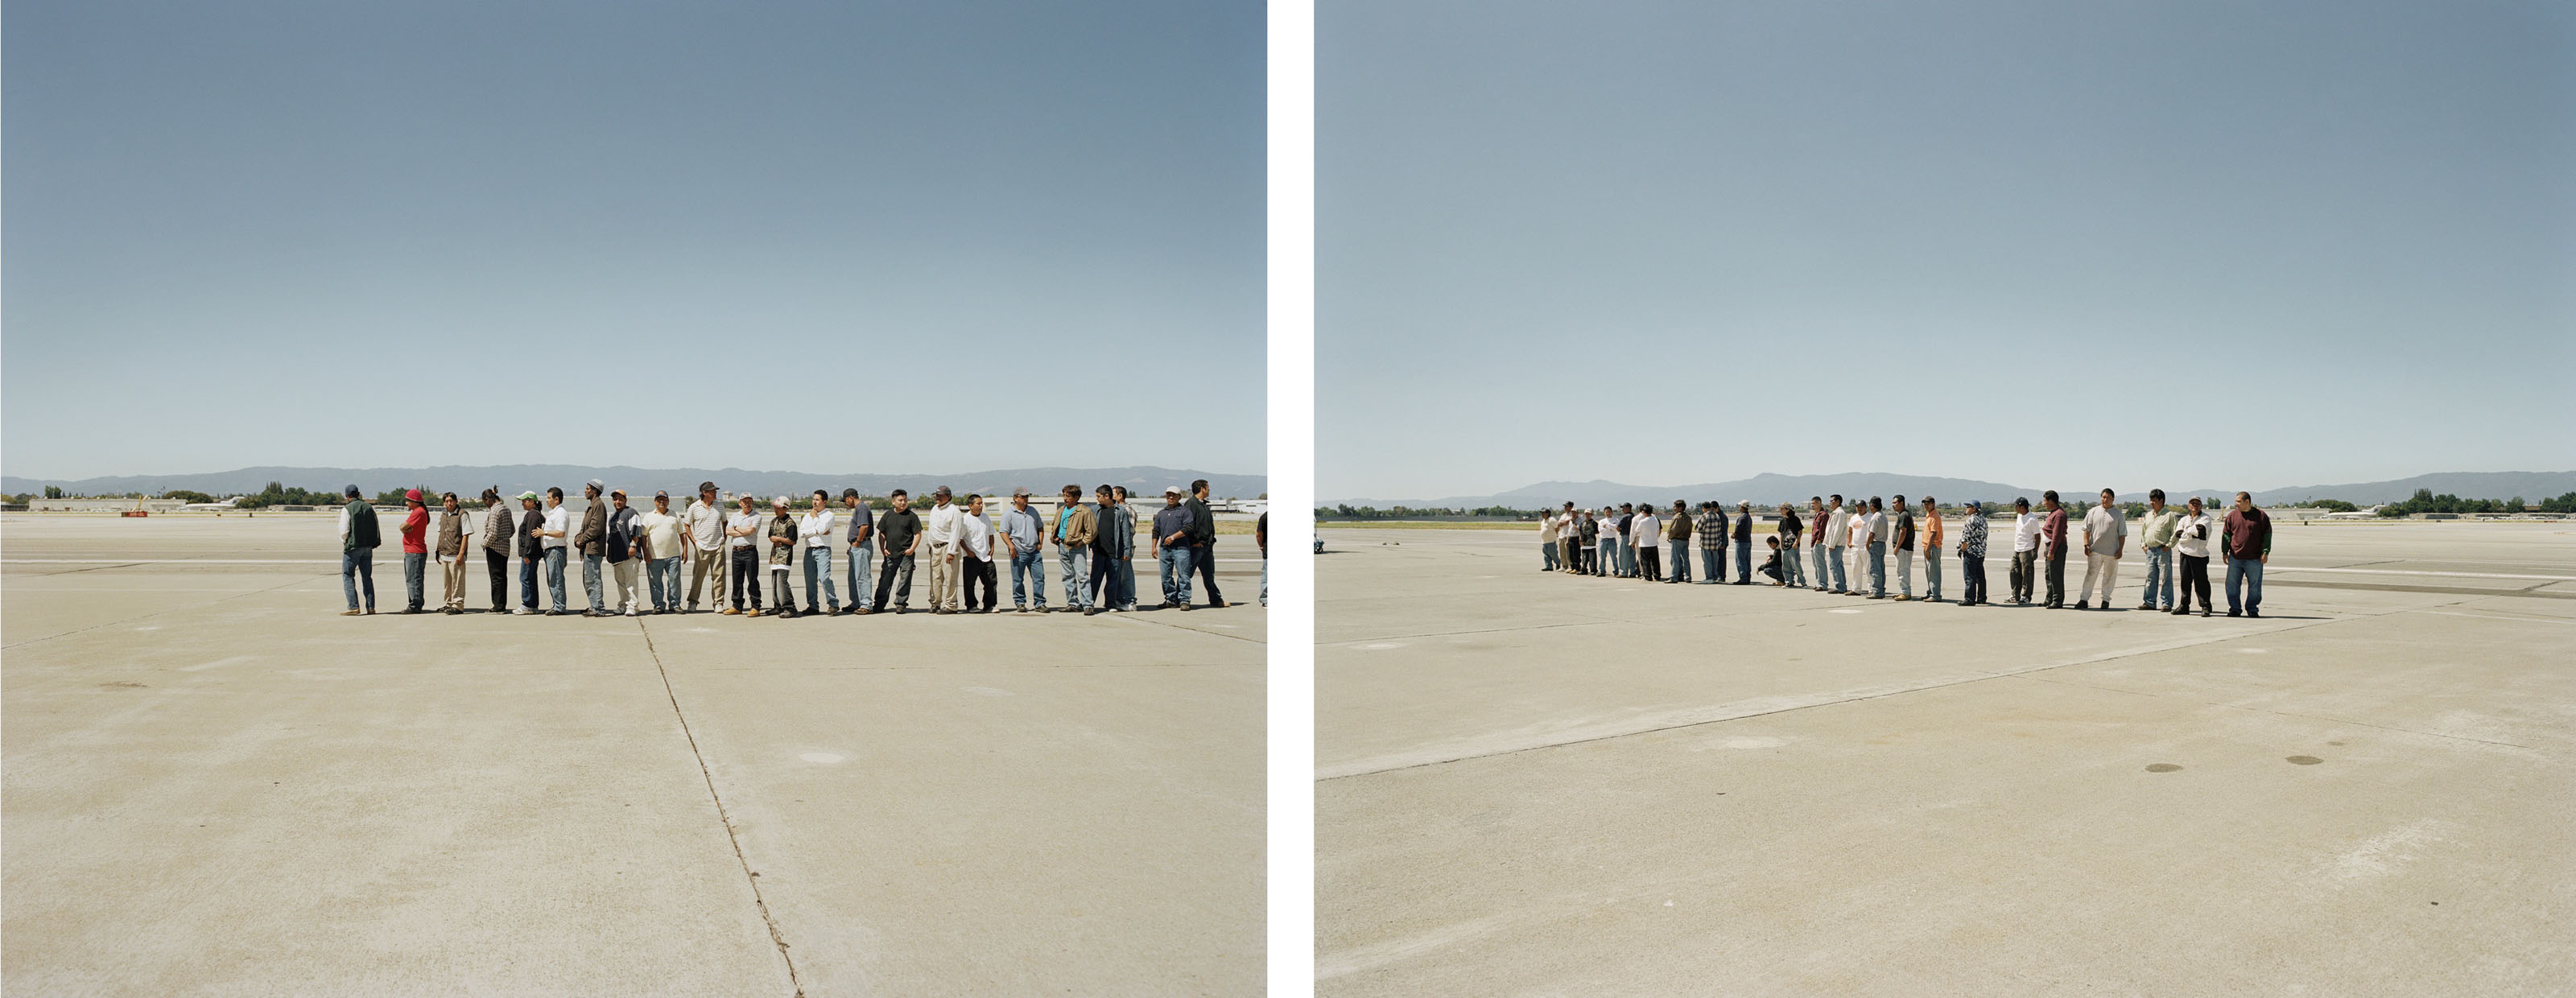 Adrian Paci The Line (Dyptich), 2007  Framed Photograph, 60 × 74,5 cm 56 x 70 cm each (print) Courtesy of the Artist, kaufmann repetto, Milano/New York and Peter Kilchmann gallery, Zurich 